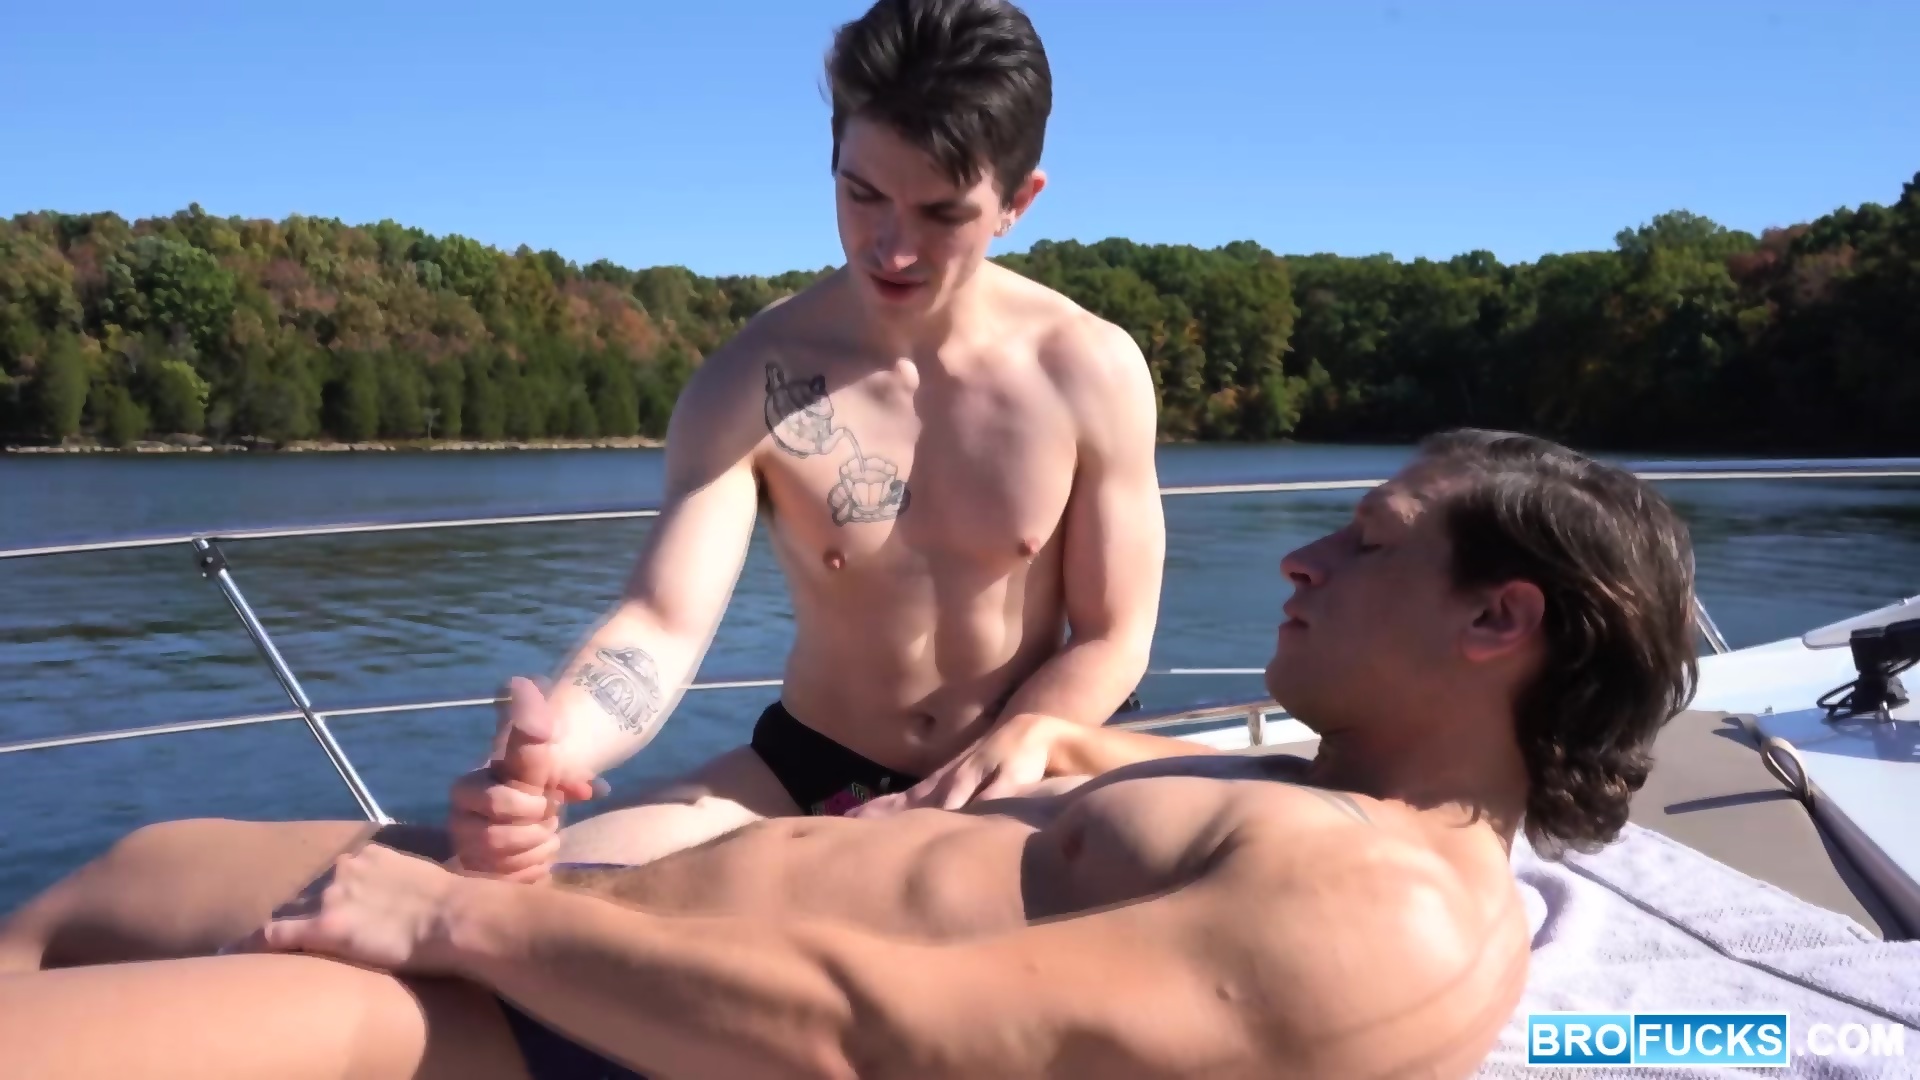 Two Extremely Hot Gay Hunks Having Raw Sex On Boat! pic pic